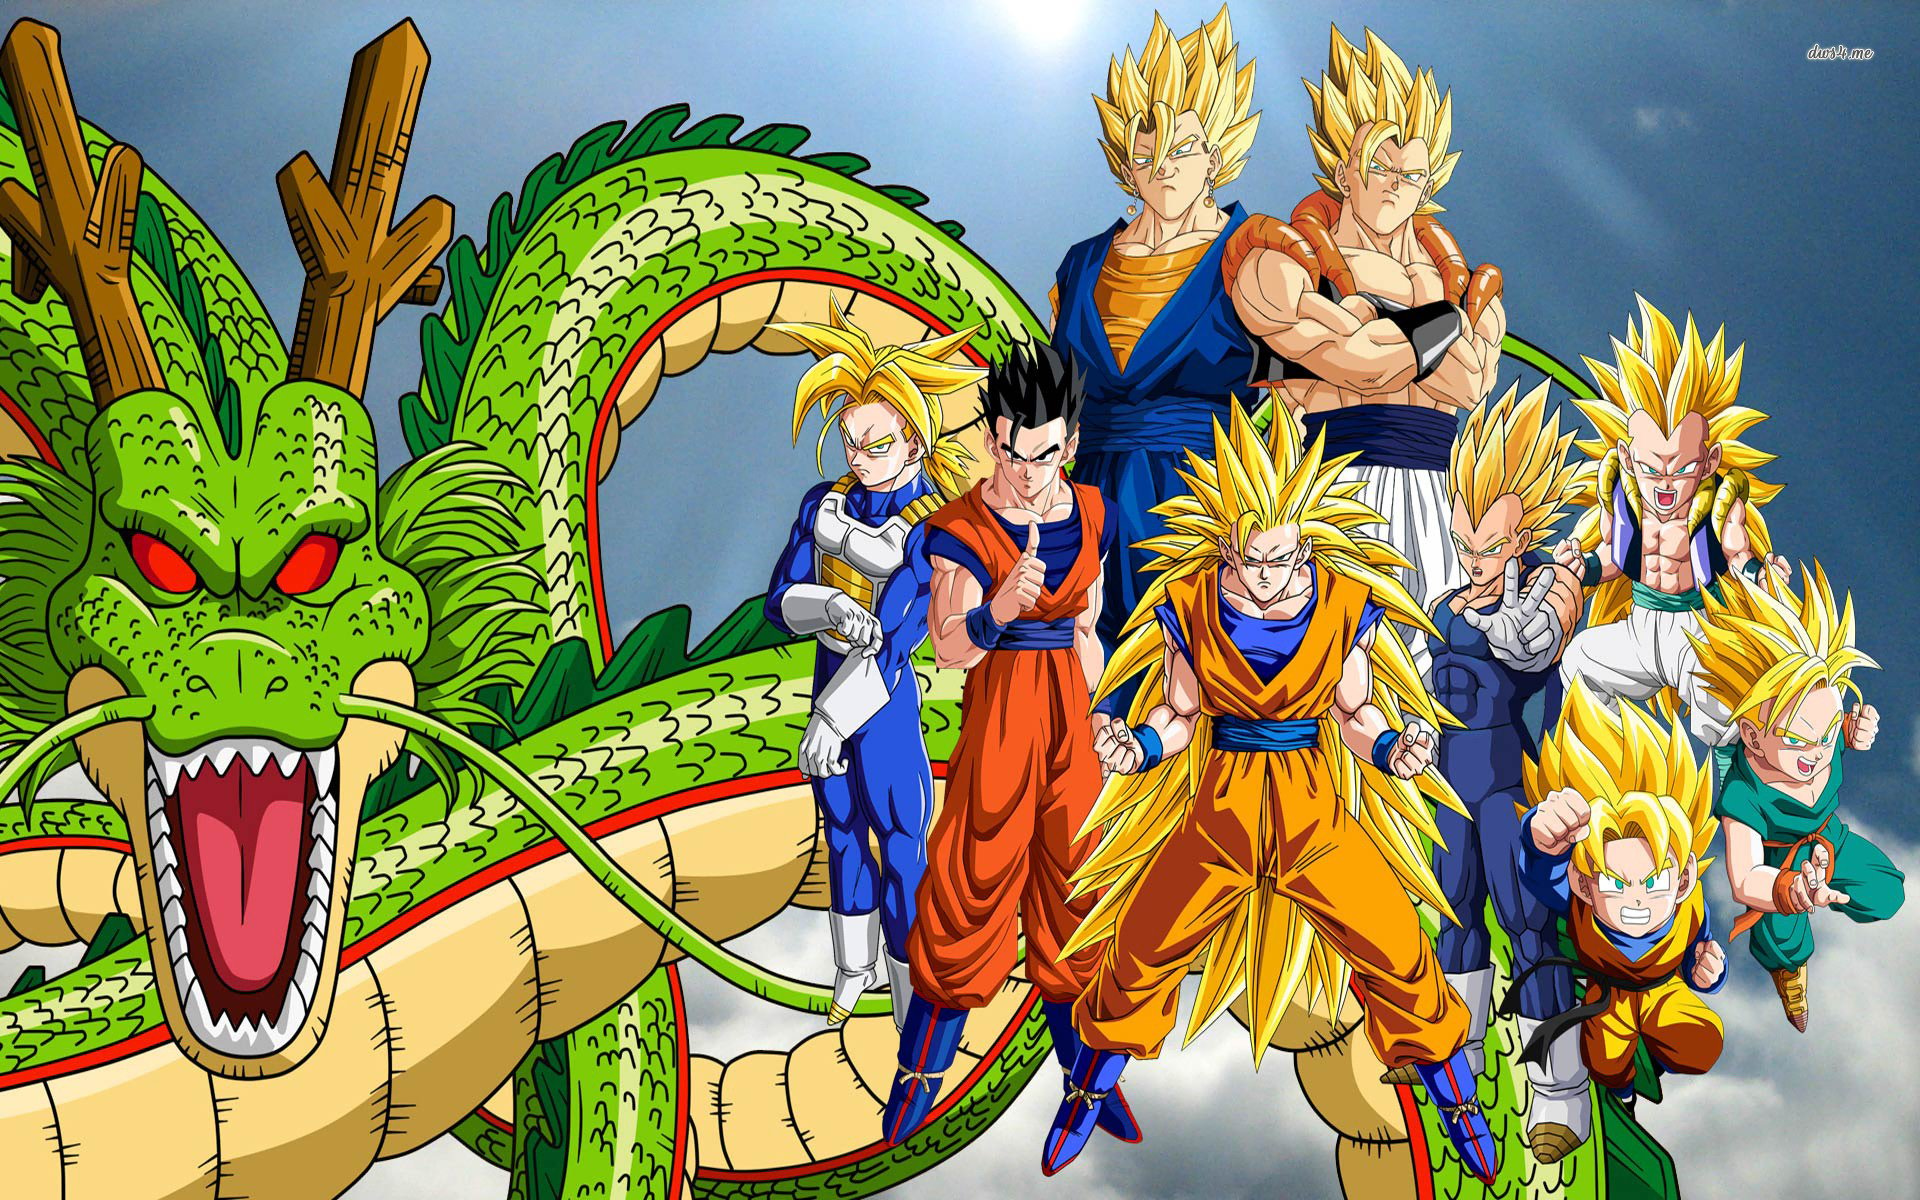 Dragon Ball Z image pack is now